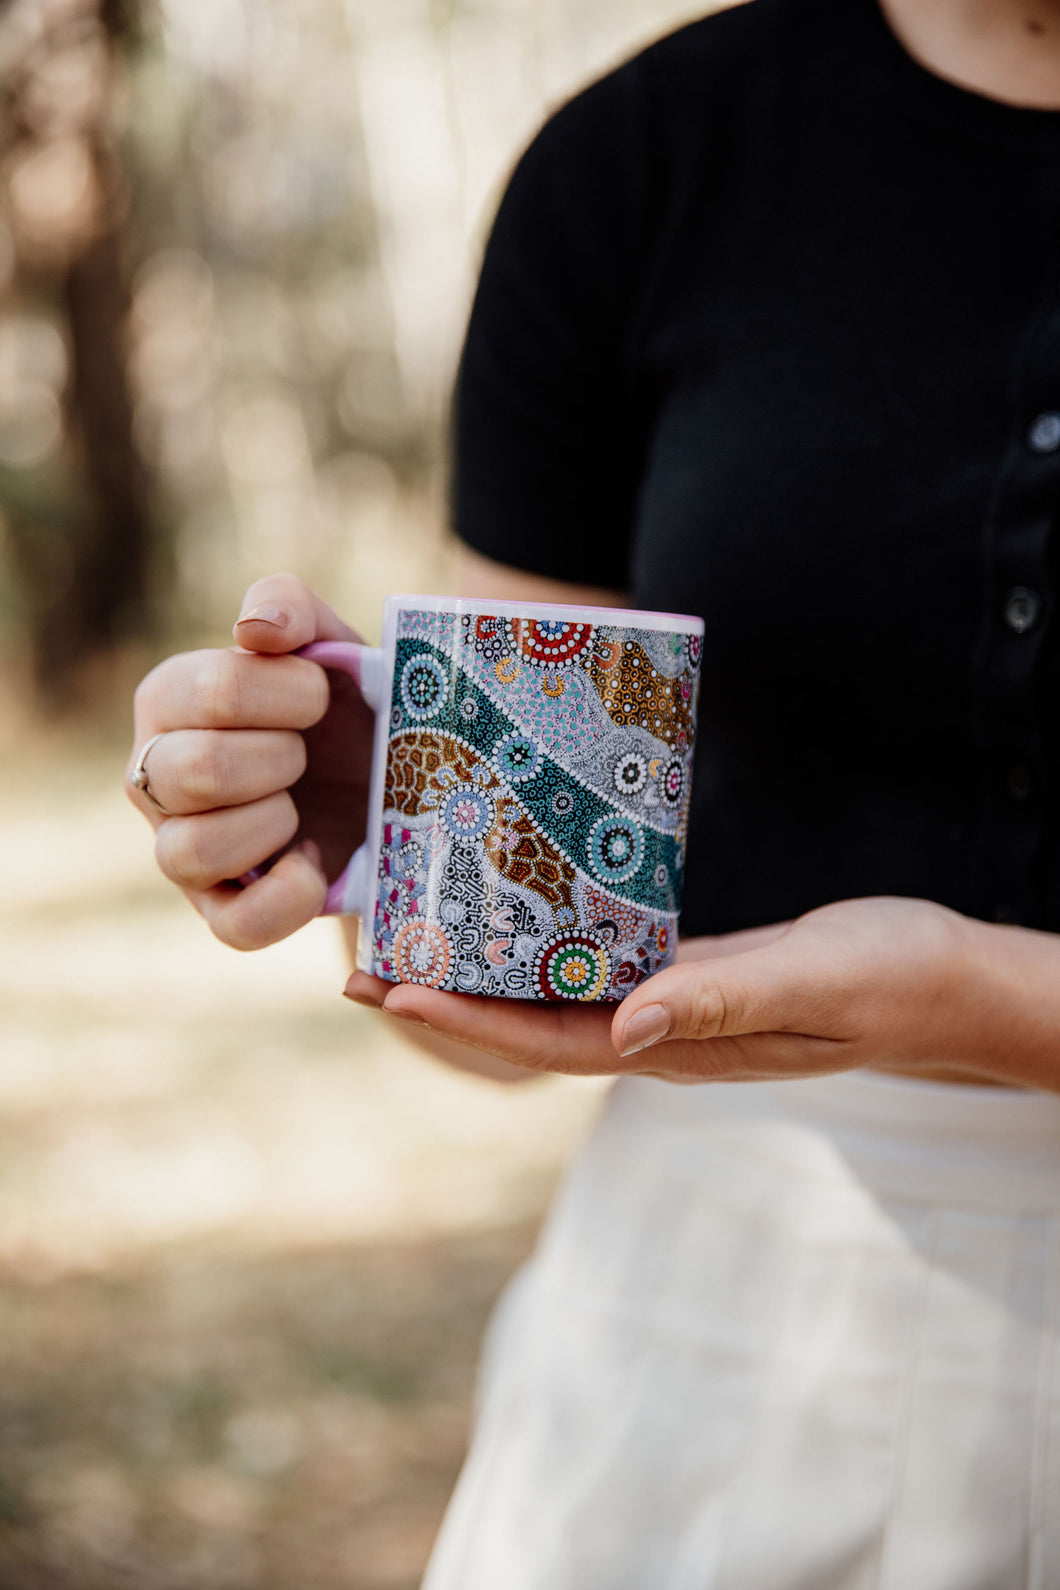 These Wiradjuri Art standard sized coffee mugs come printed with the Wiradjuri River People artwork. The mug can be purchased in the colour options of blue, pink, yellow or black for the handle and inside. Indigenous Art Aboriginal Art First Nations Art